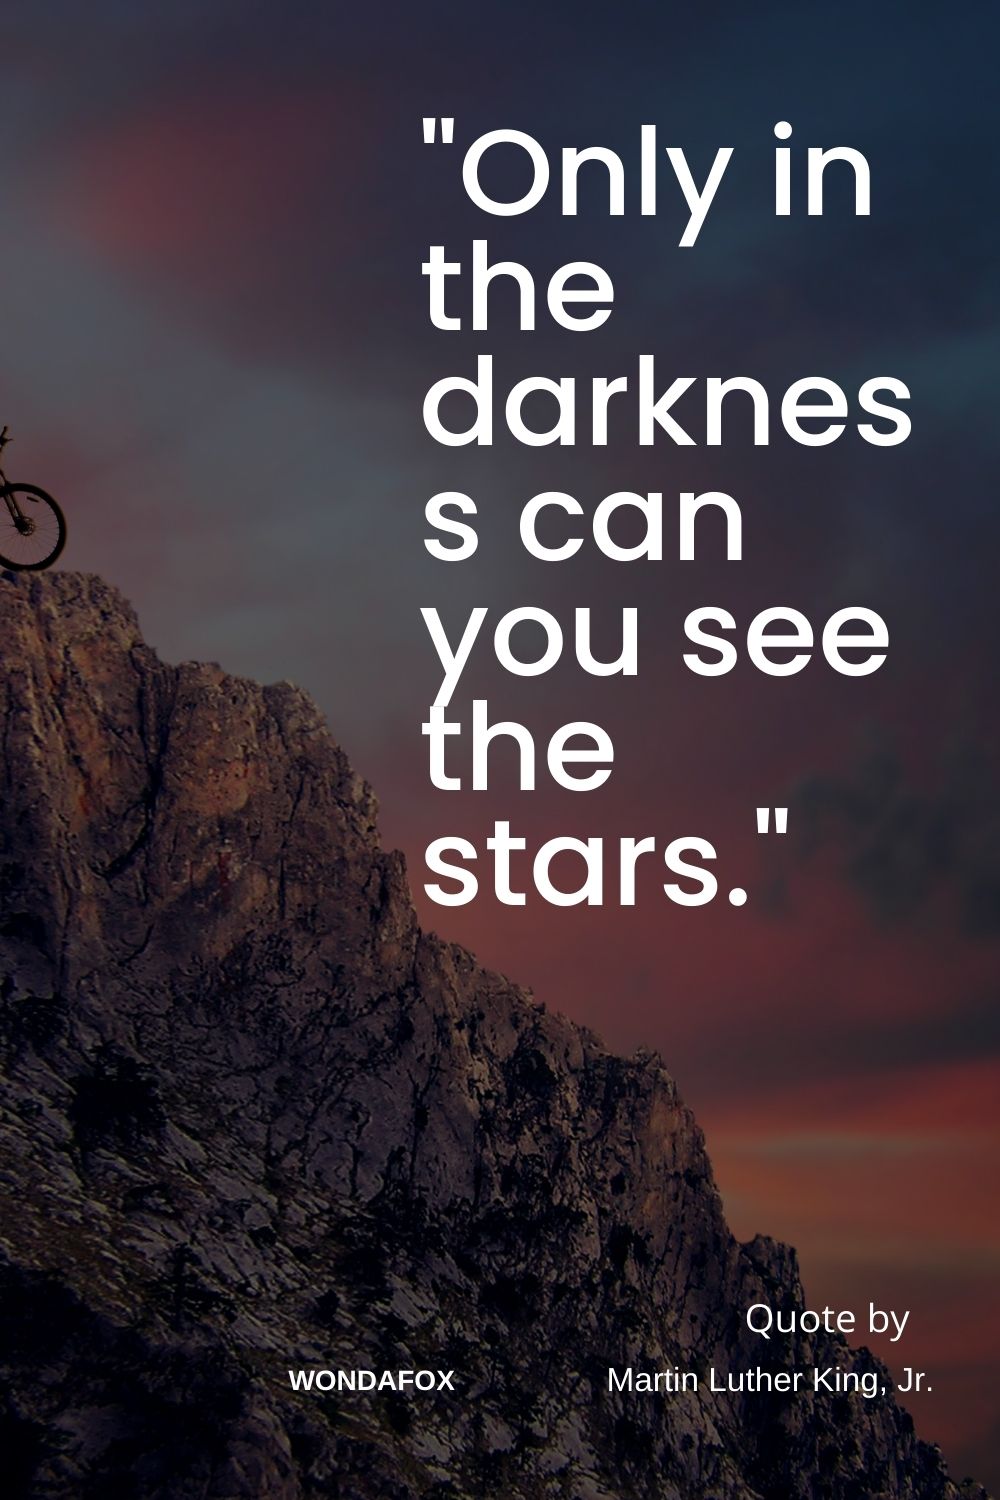 Short Positive Quotes  "Only in the darkness can you see the stars." 
Martin Luther King, Jr.